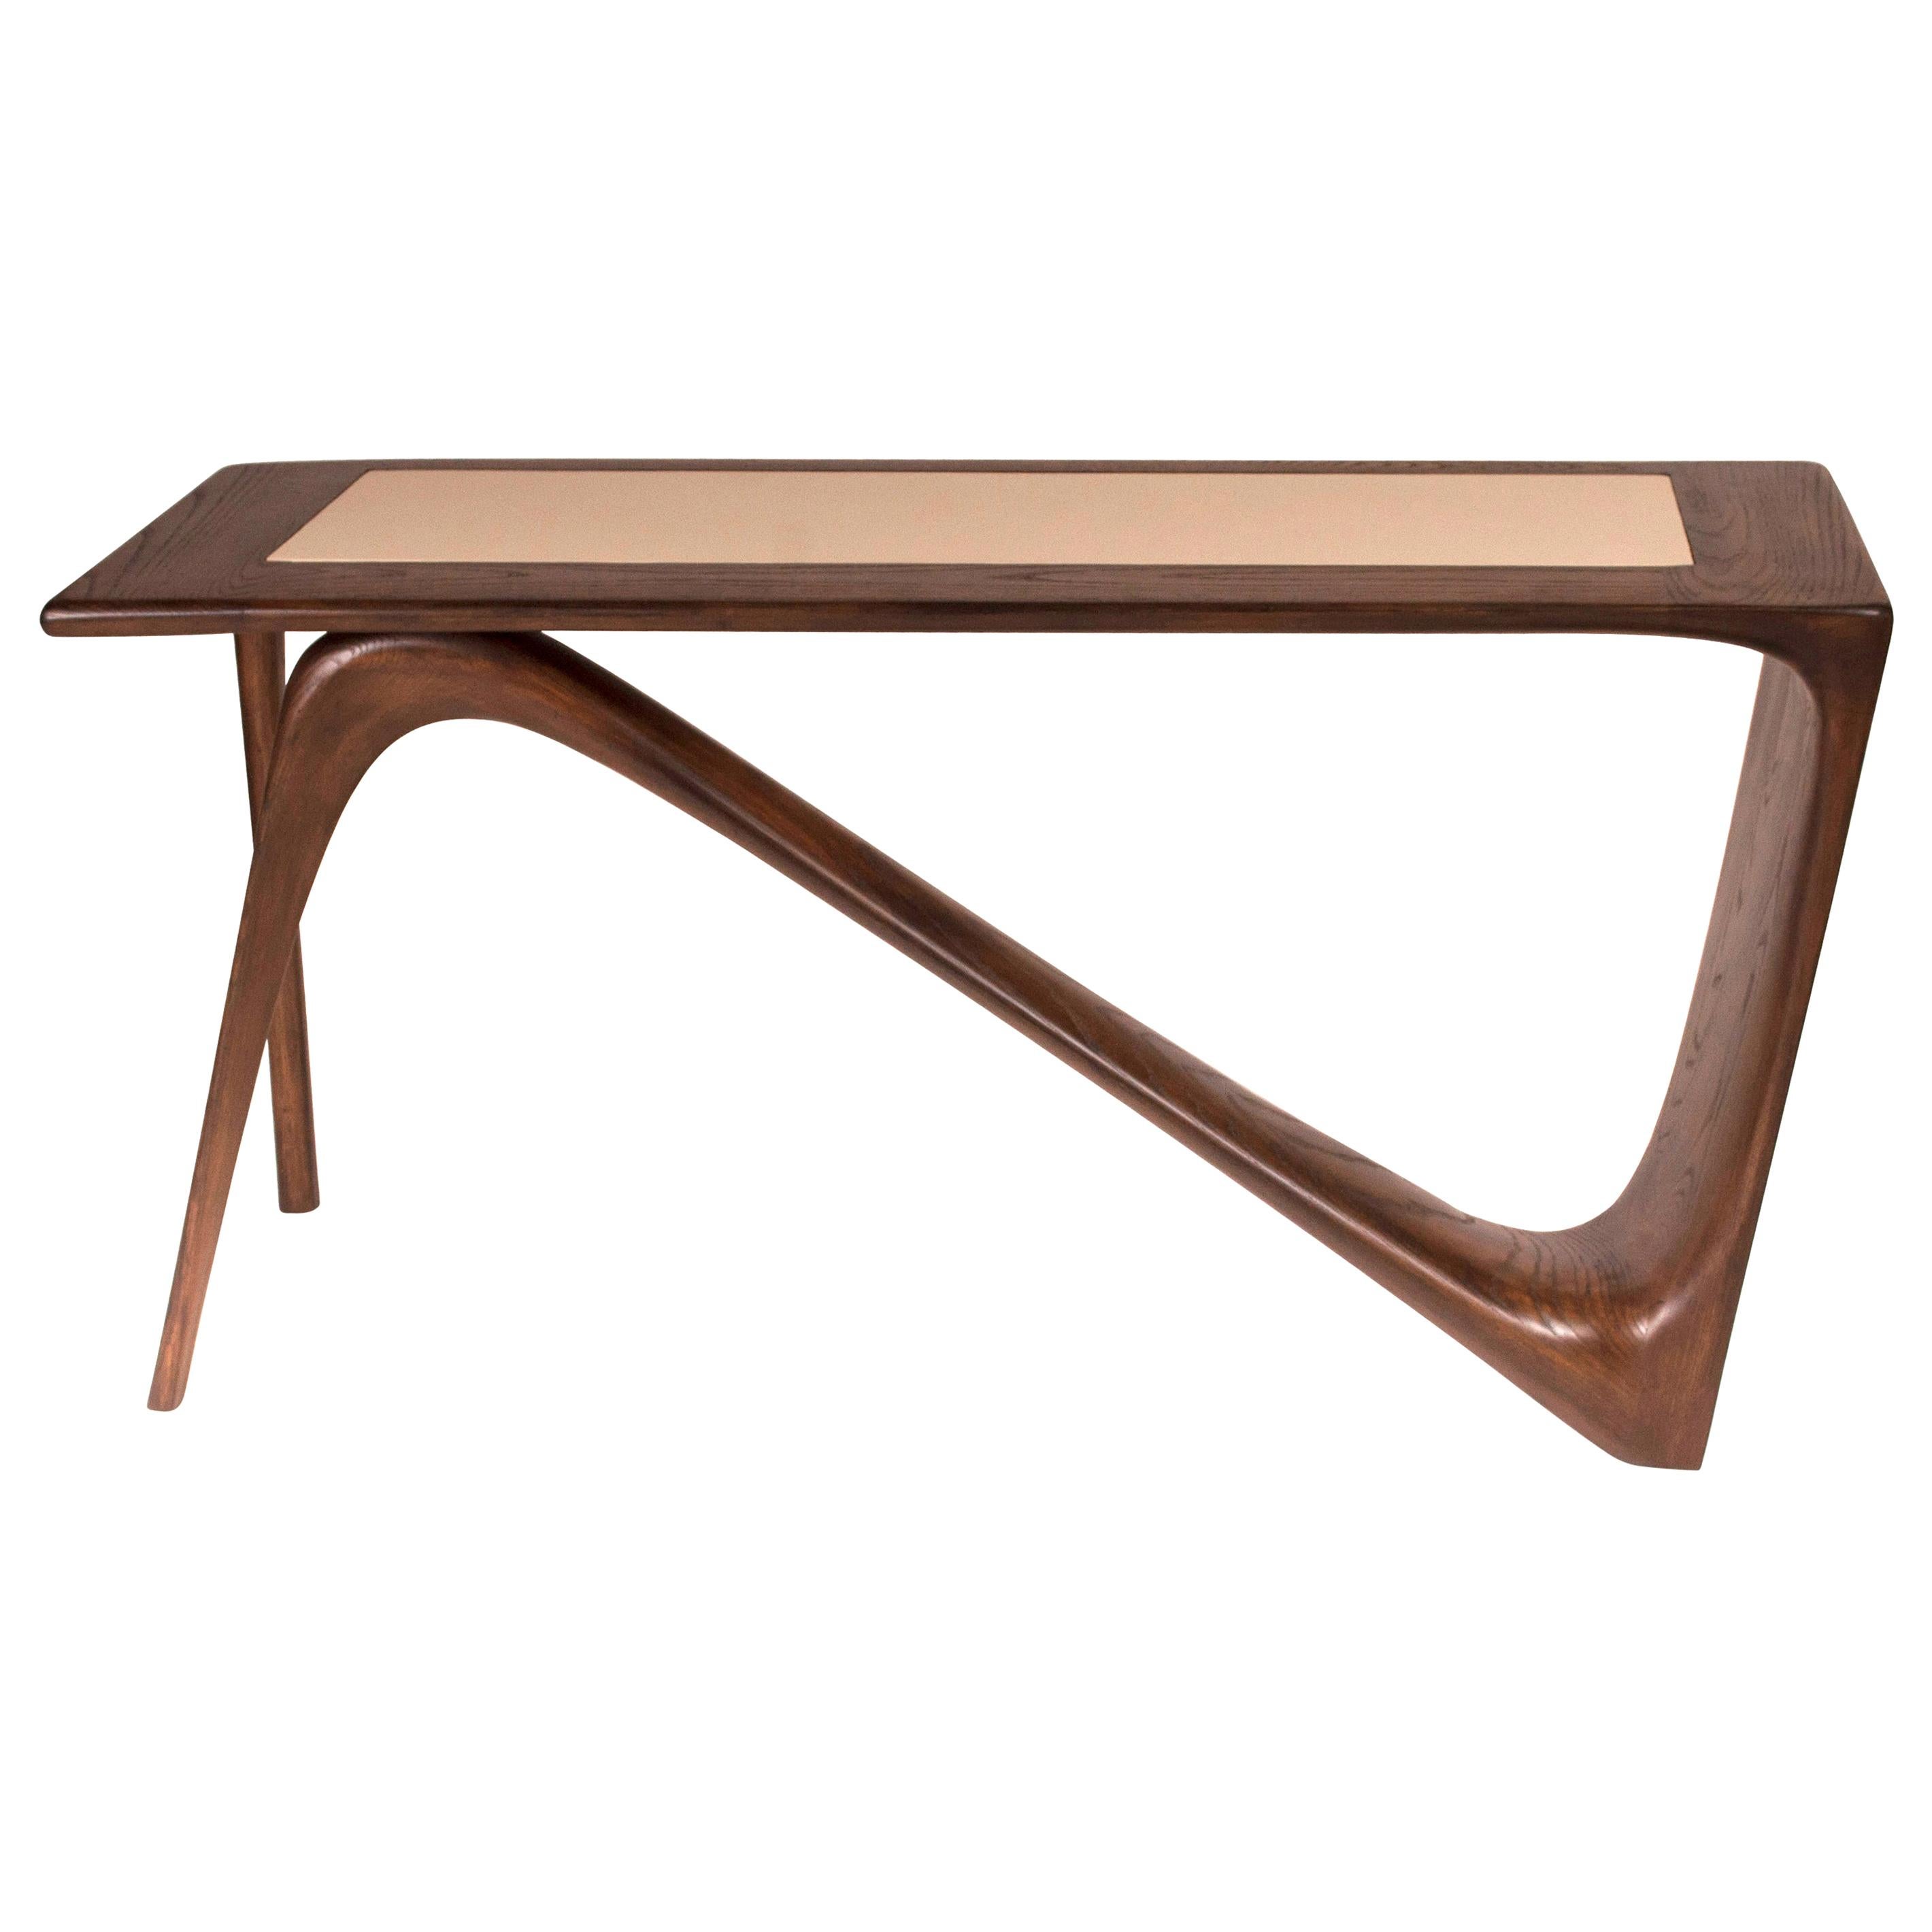 Amorph Astra Desk Graphite Walnut stain on Ash wood with Top leather For Sale